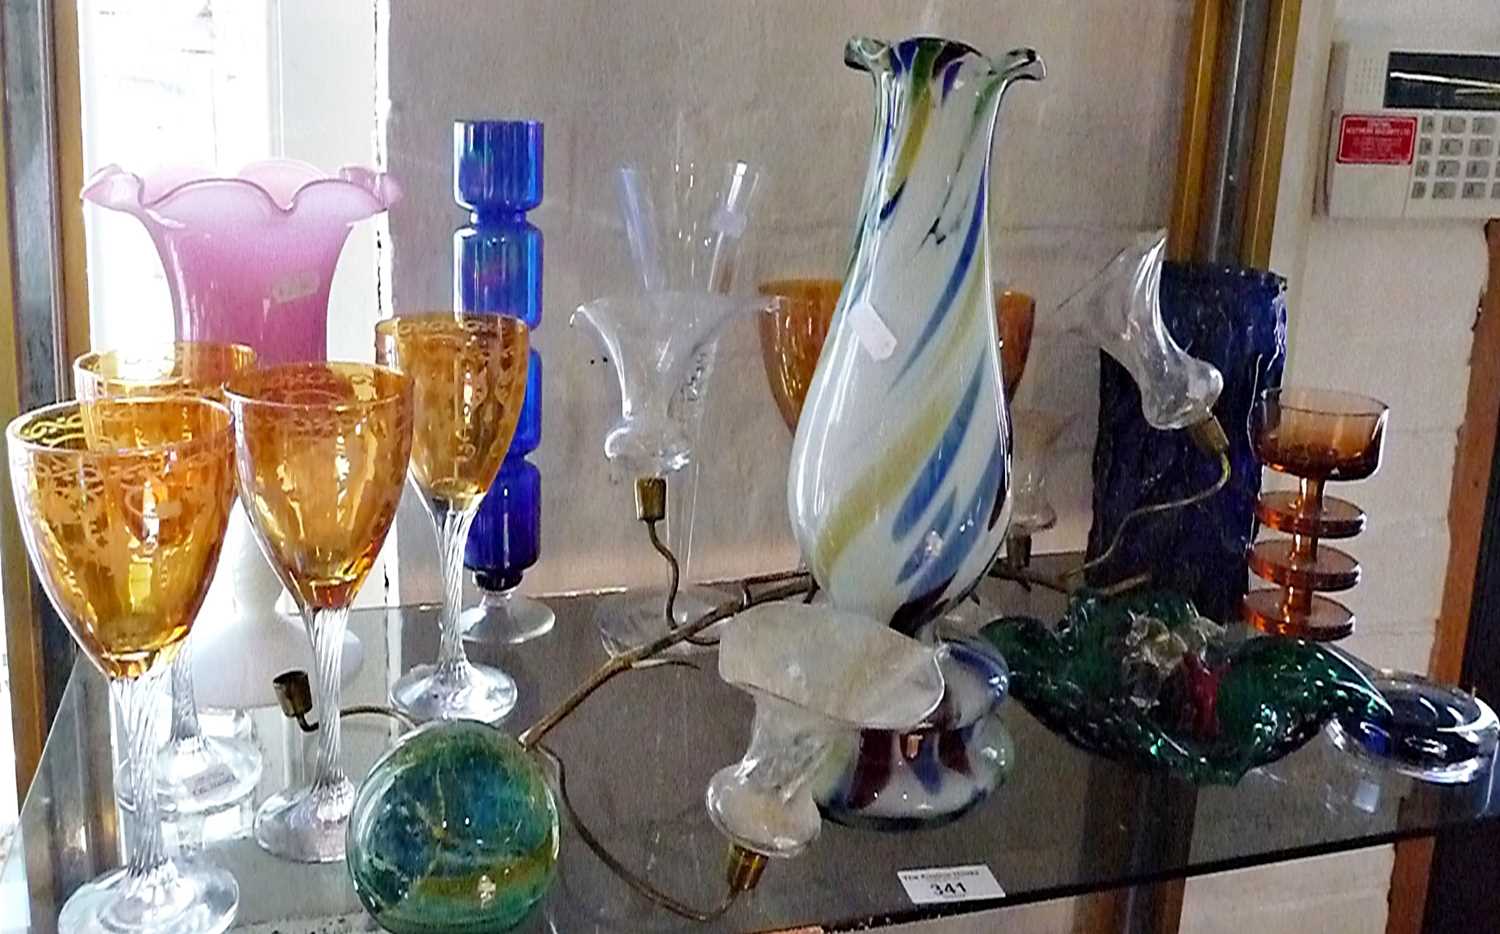 Good collection of assorted glassware including 1970's orange glass ~Wedgwood candleholder, Mdina